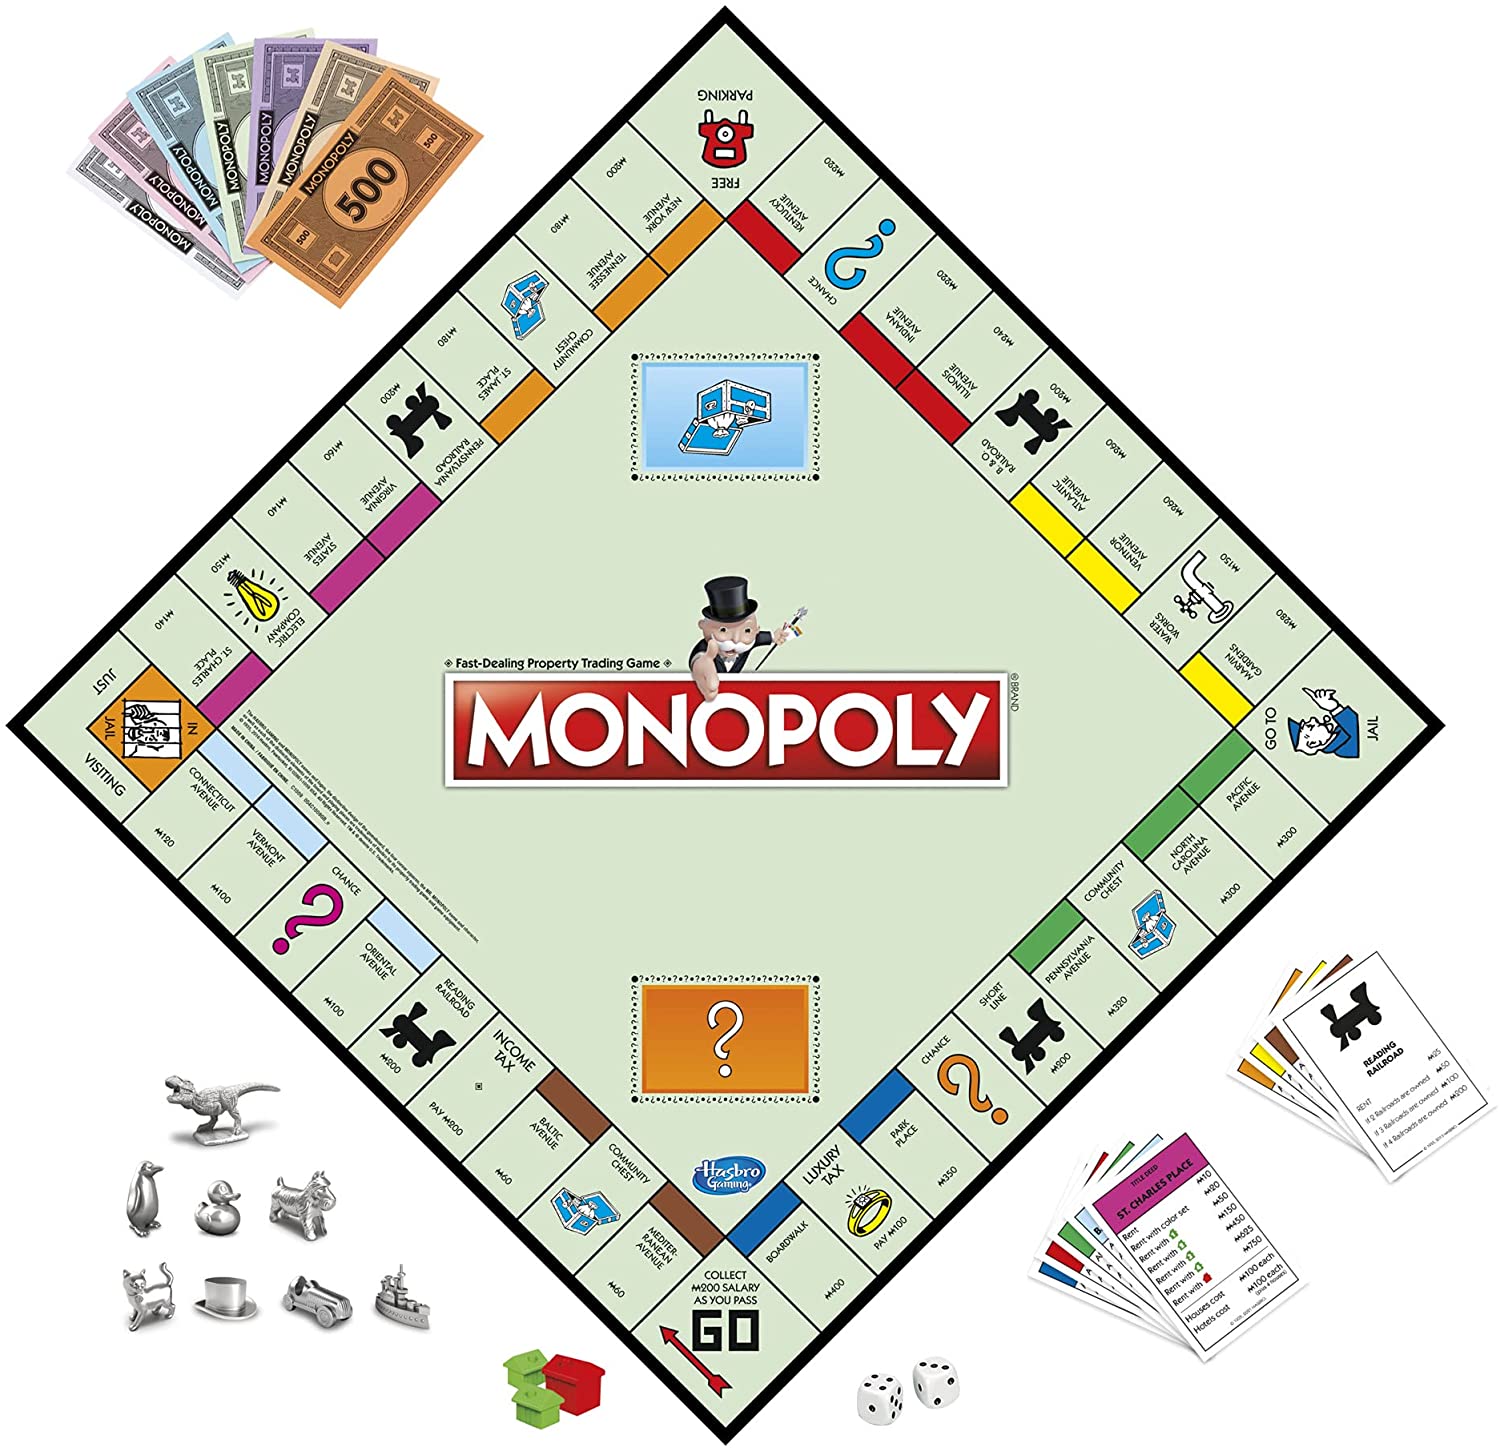 Find out about Monopoly